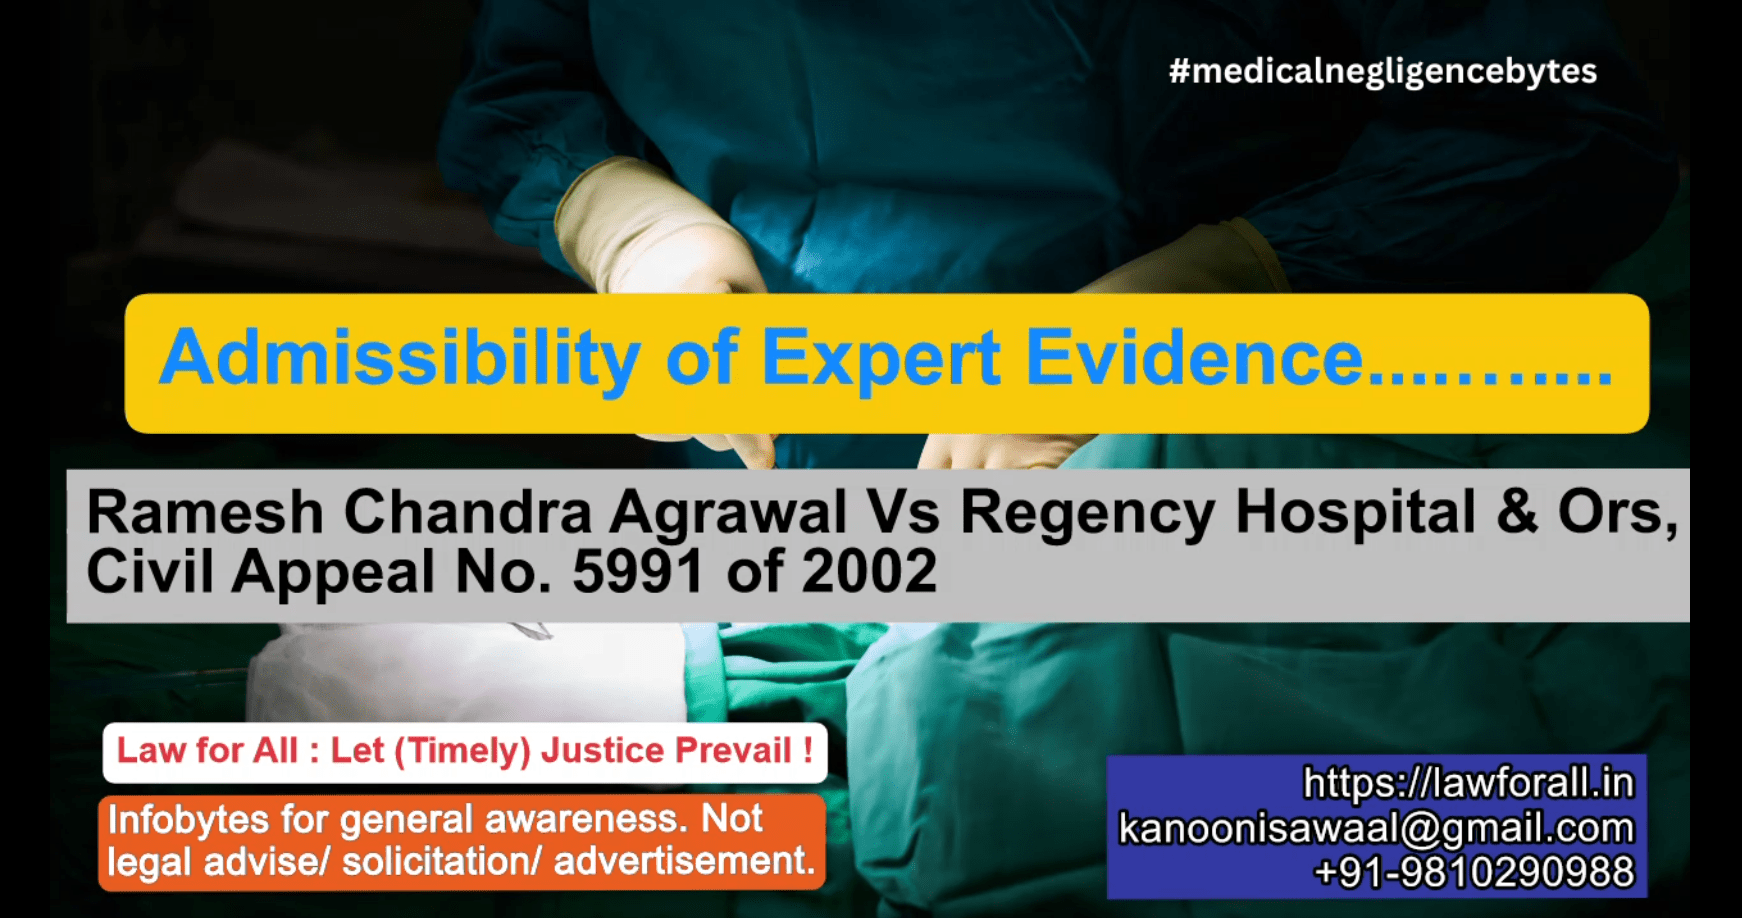 On Admissibility of Expert Evidence